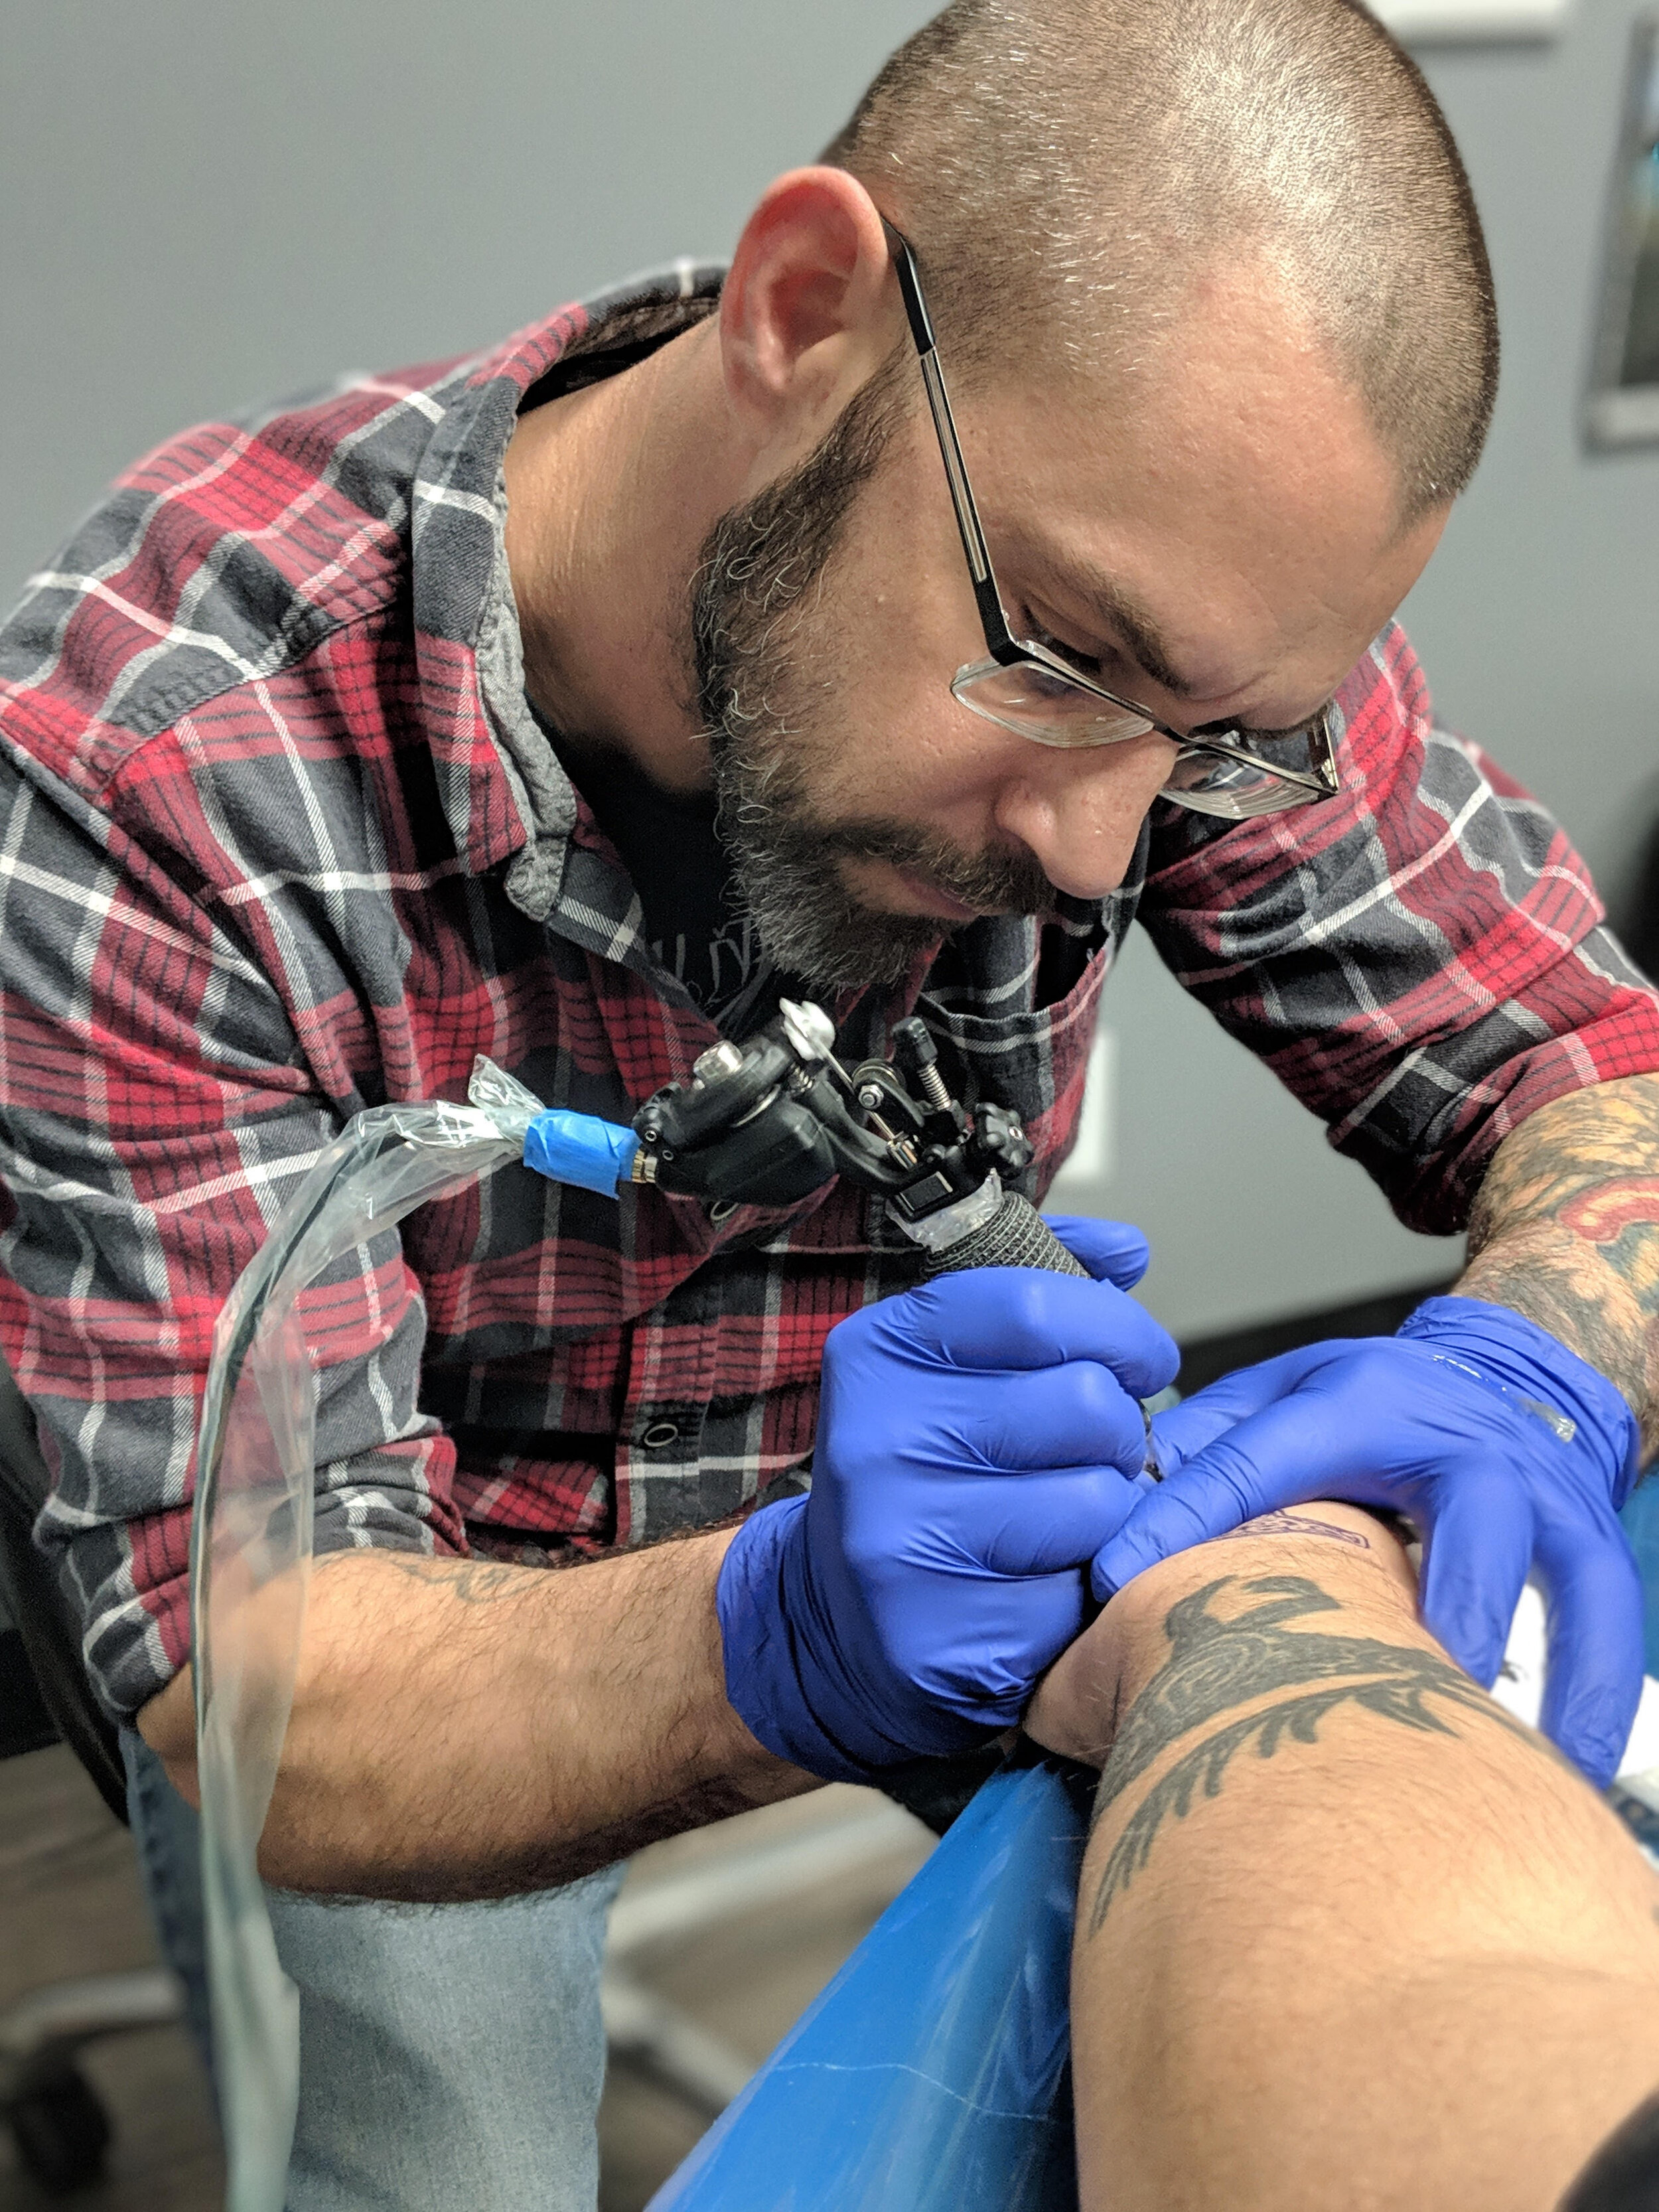 Top 20 Tattoo Shops In South Carolina To Find Your Dream Tattoo